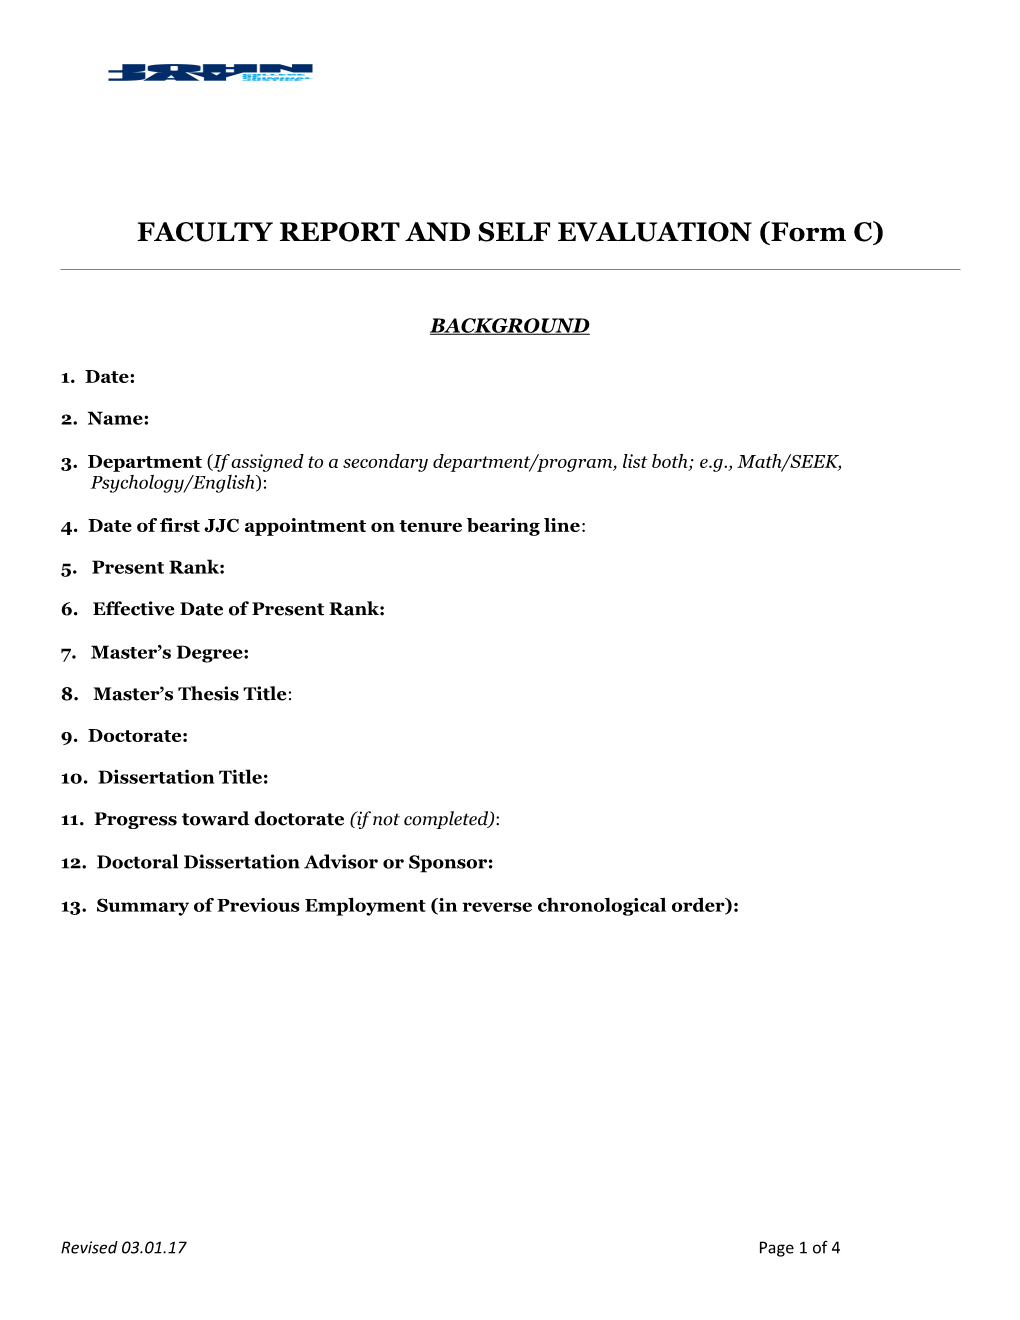 FACULTY REPORT and SELF EVALUATION (Form C)